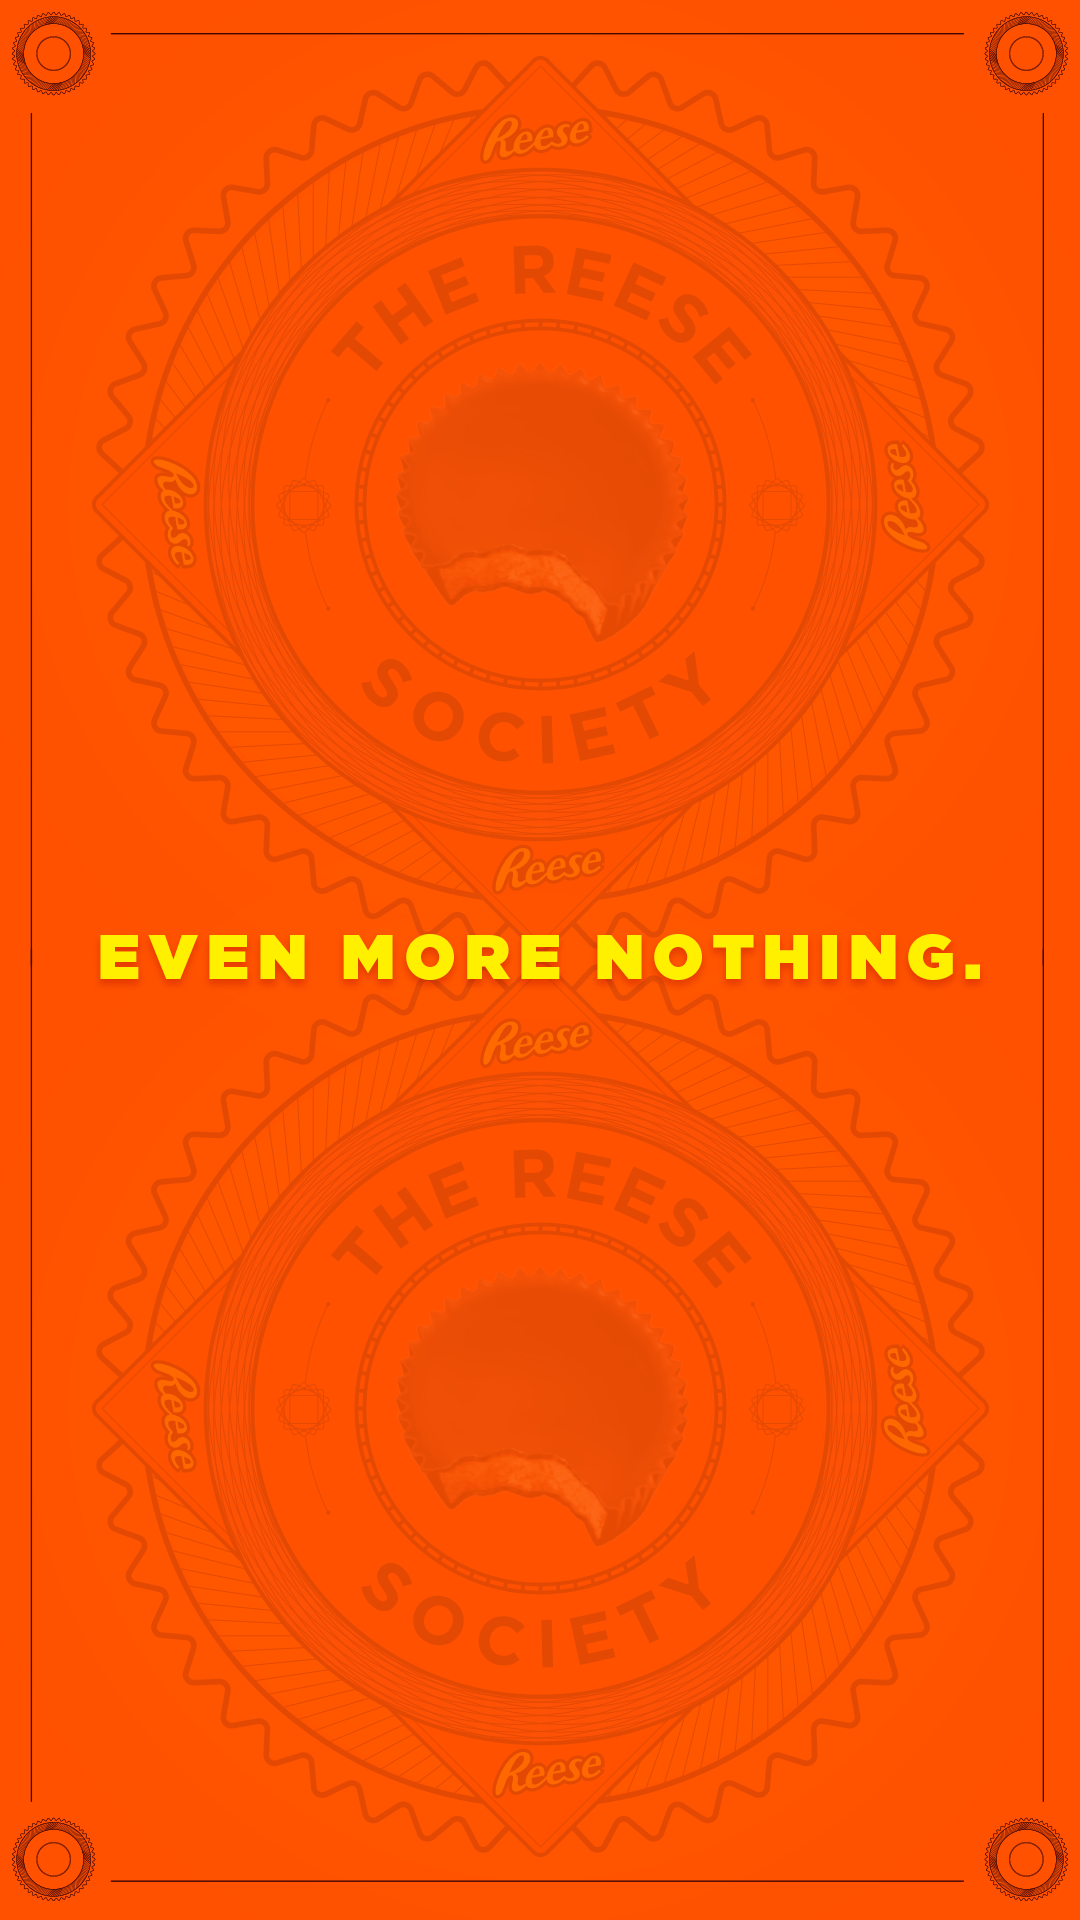 Reese-Society-IG_0017_Even-more-nothing.png